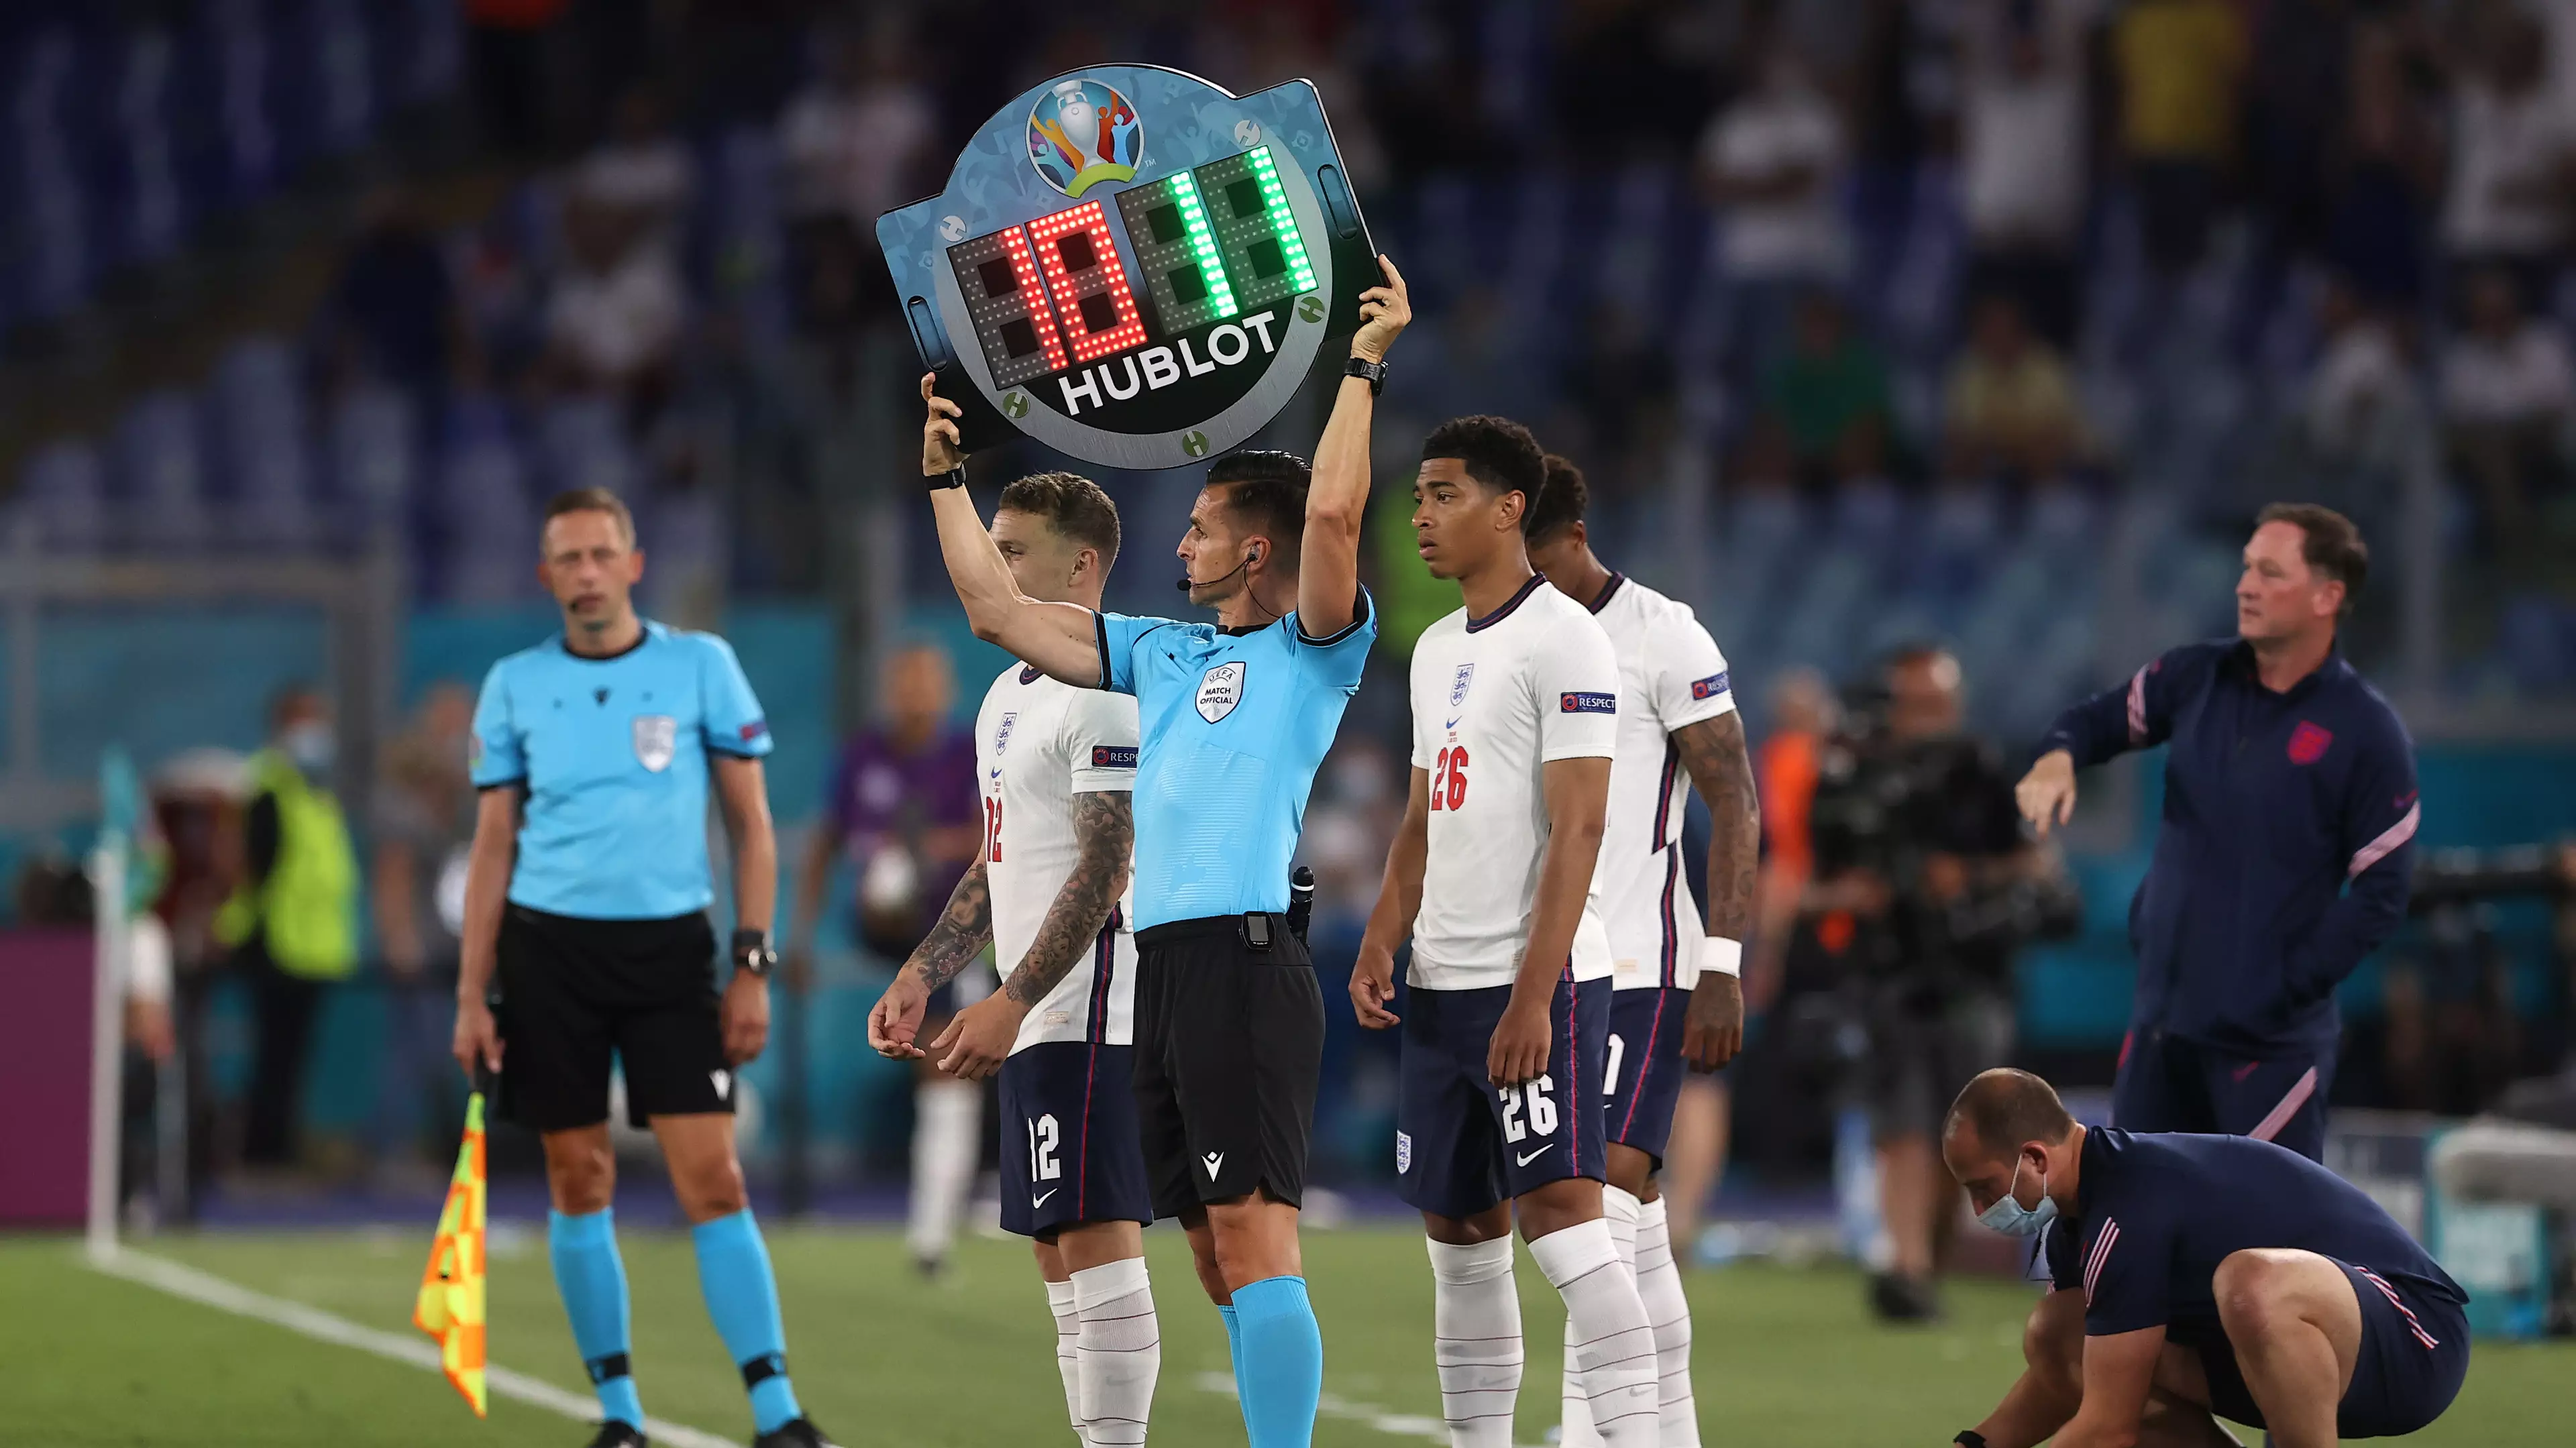 How Many Subs Are Allowed In Euro 2020 Final?